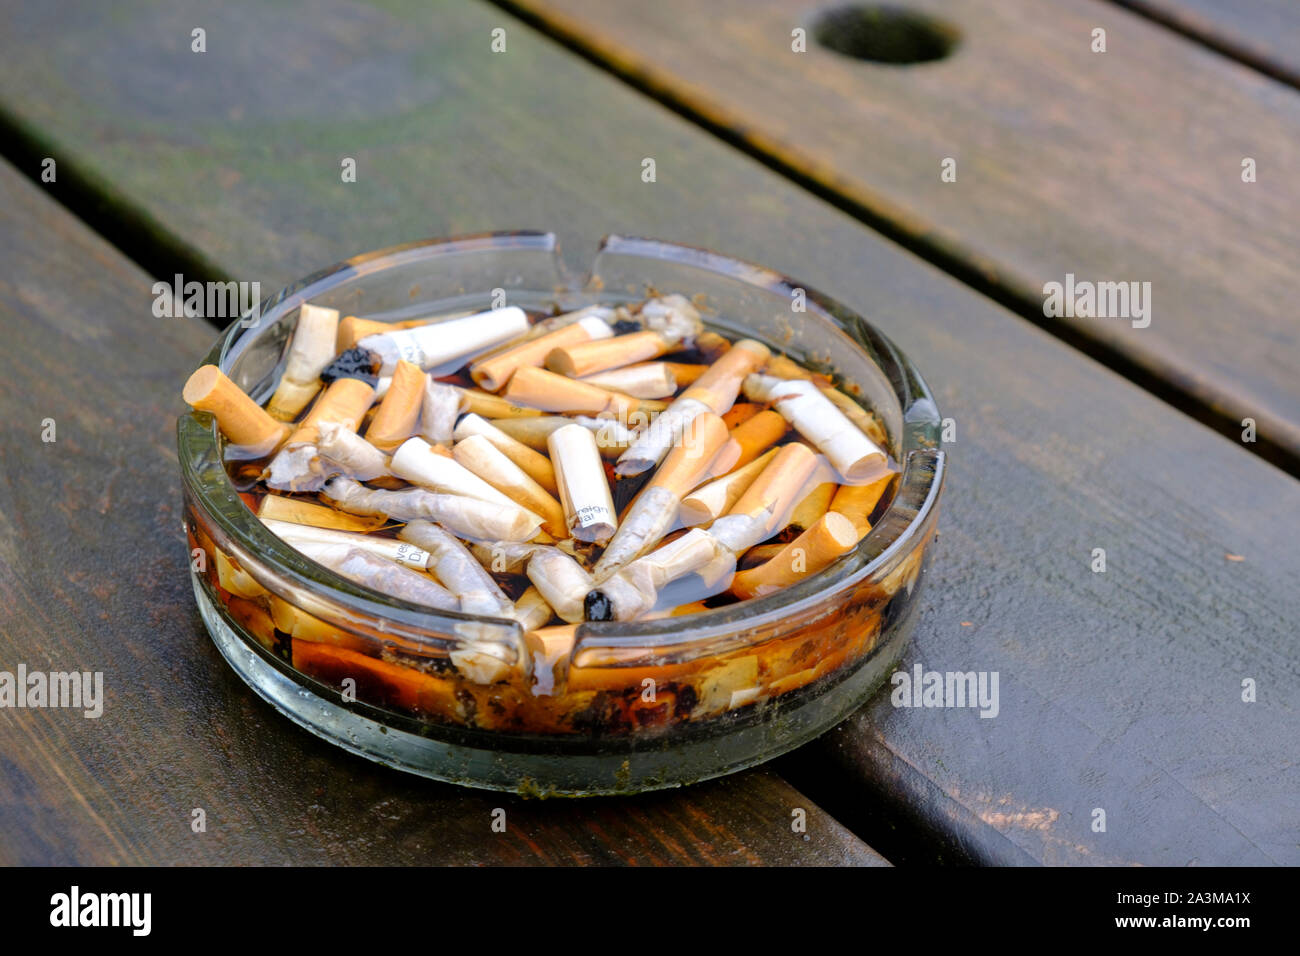 Ashtray in the car full of cigarette ends and ash Stock Photo